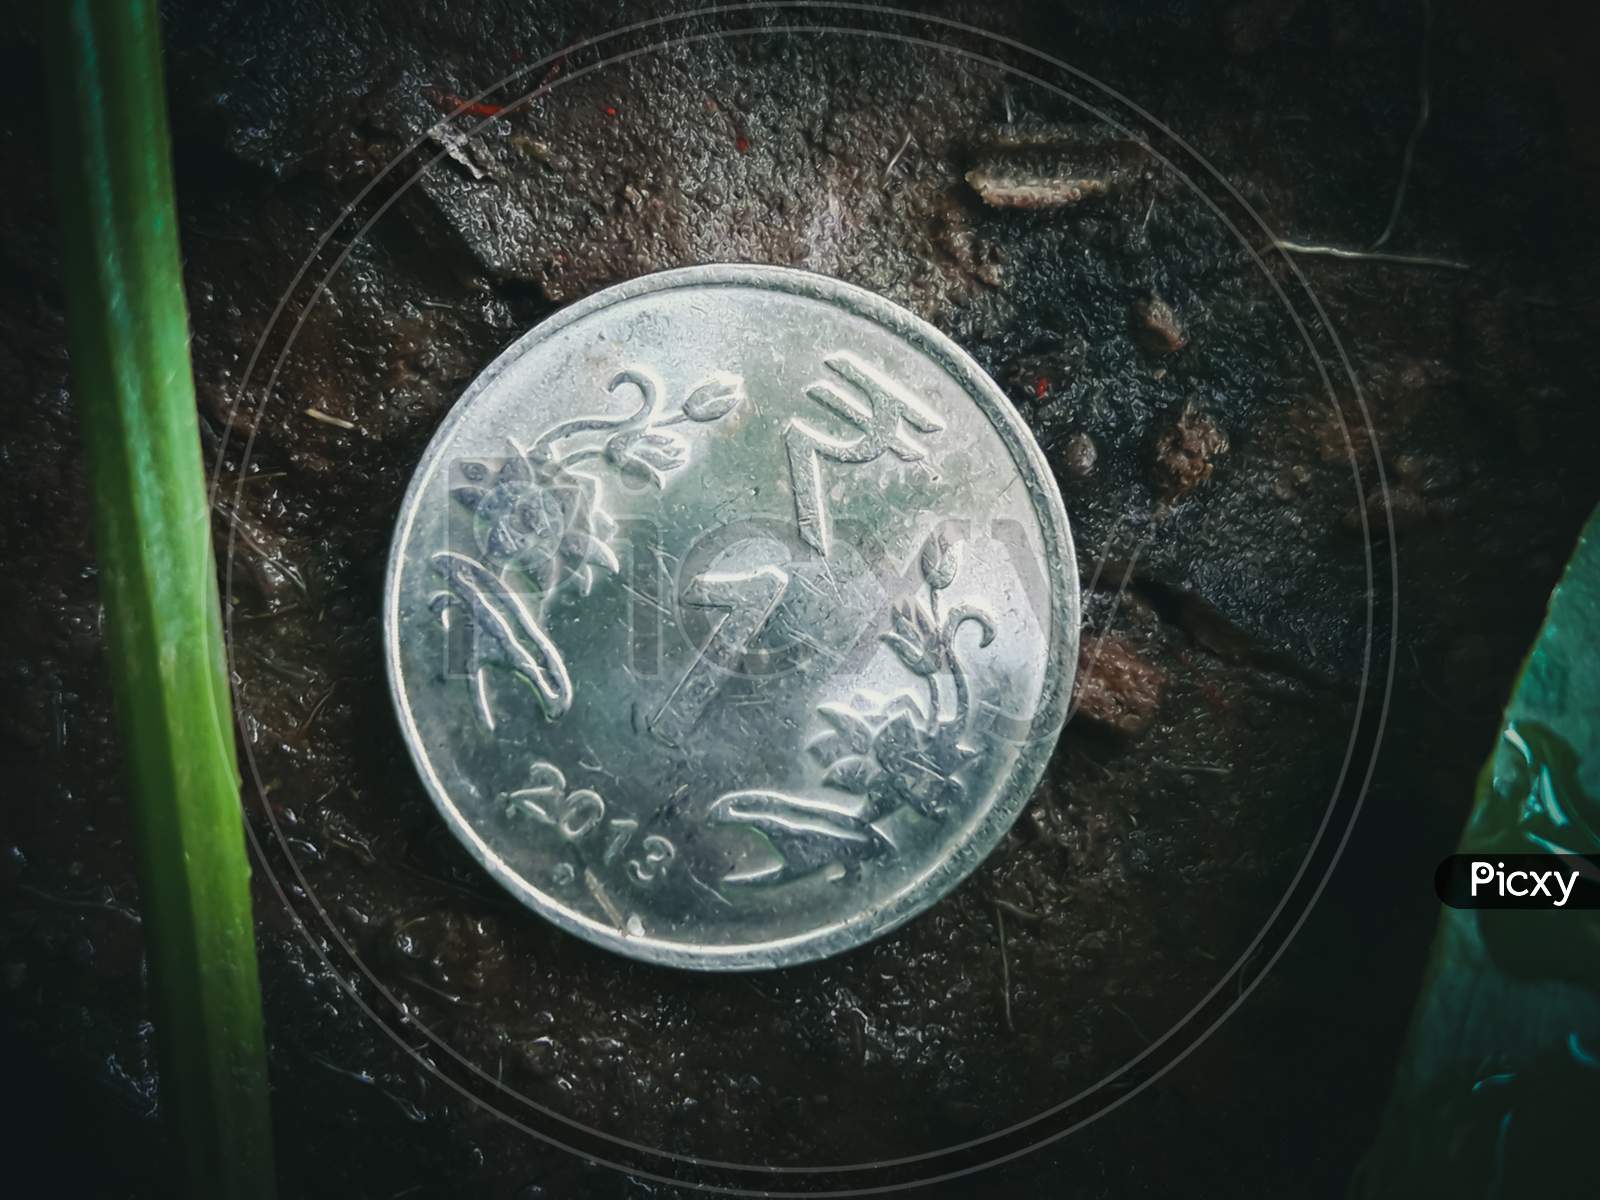 Shining 1 Rupee Coin In The Soil With Dust